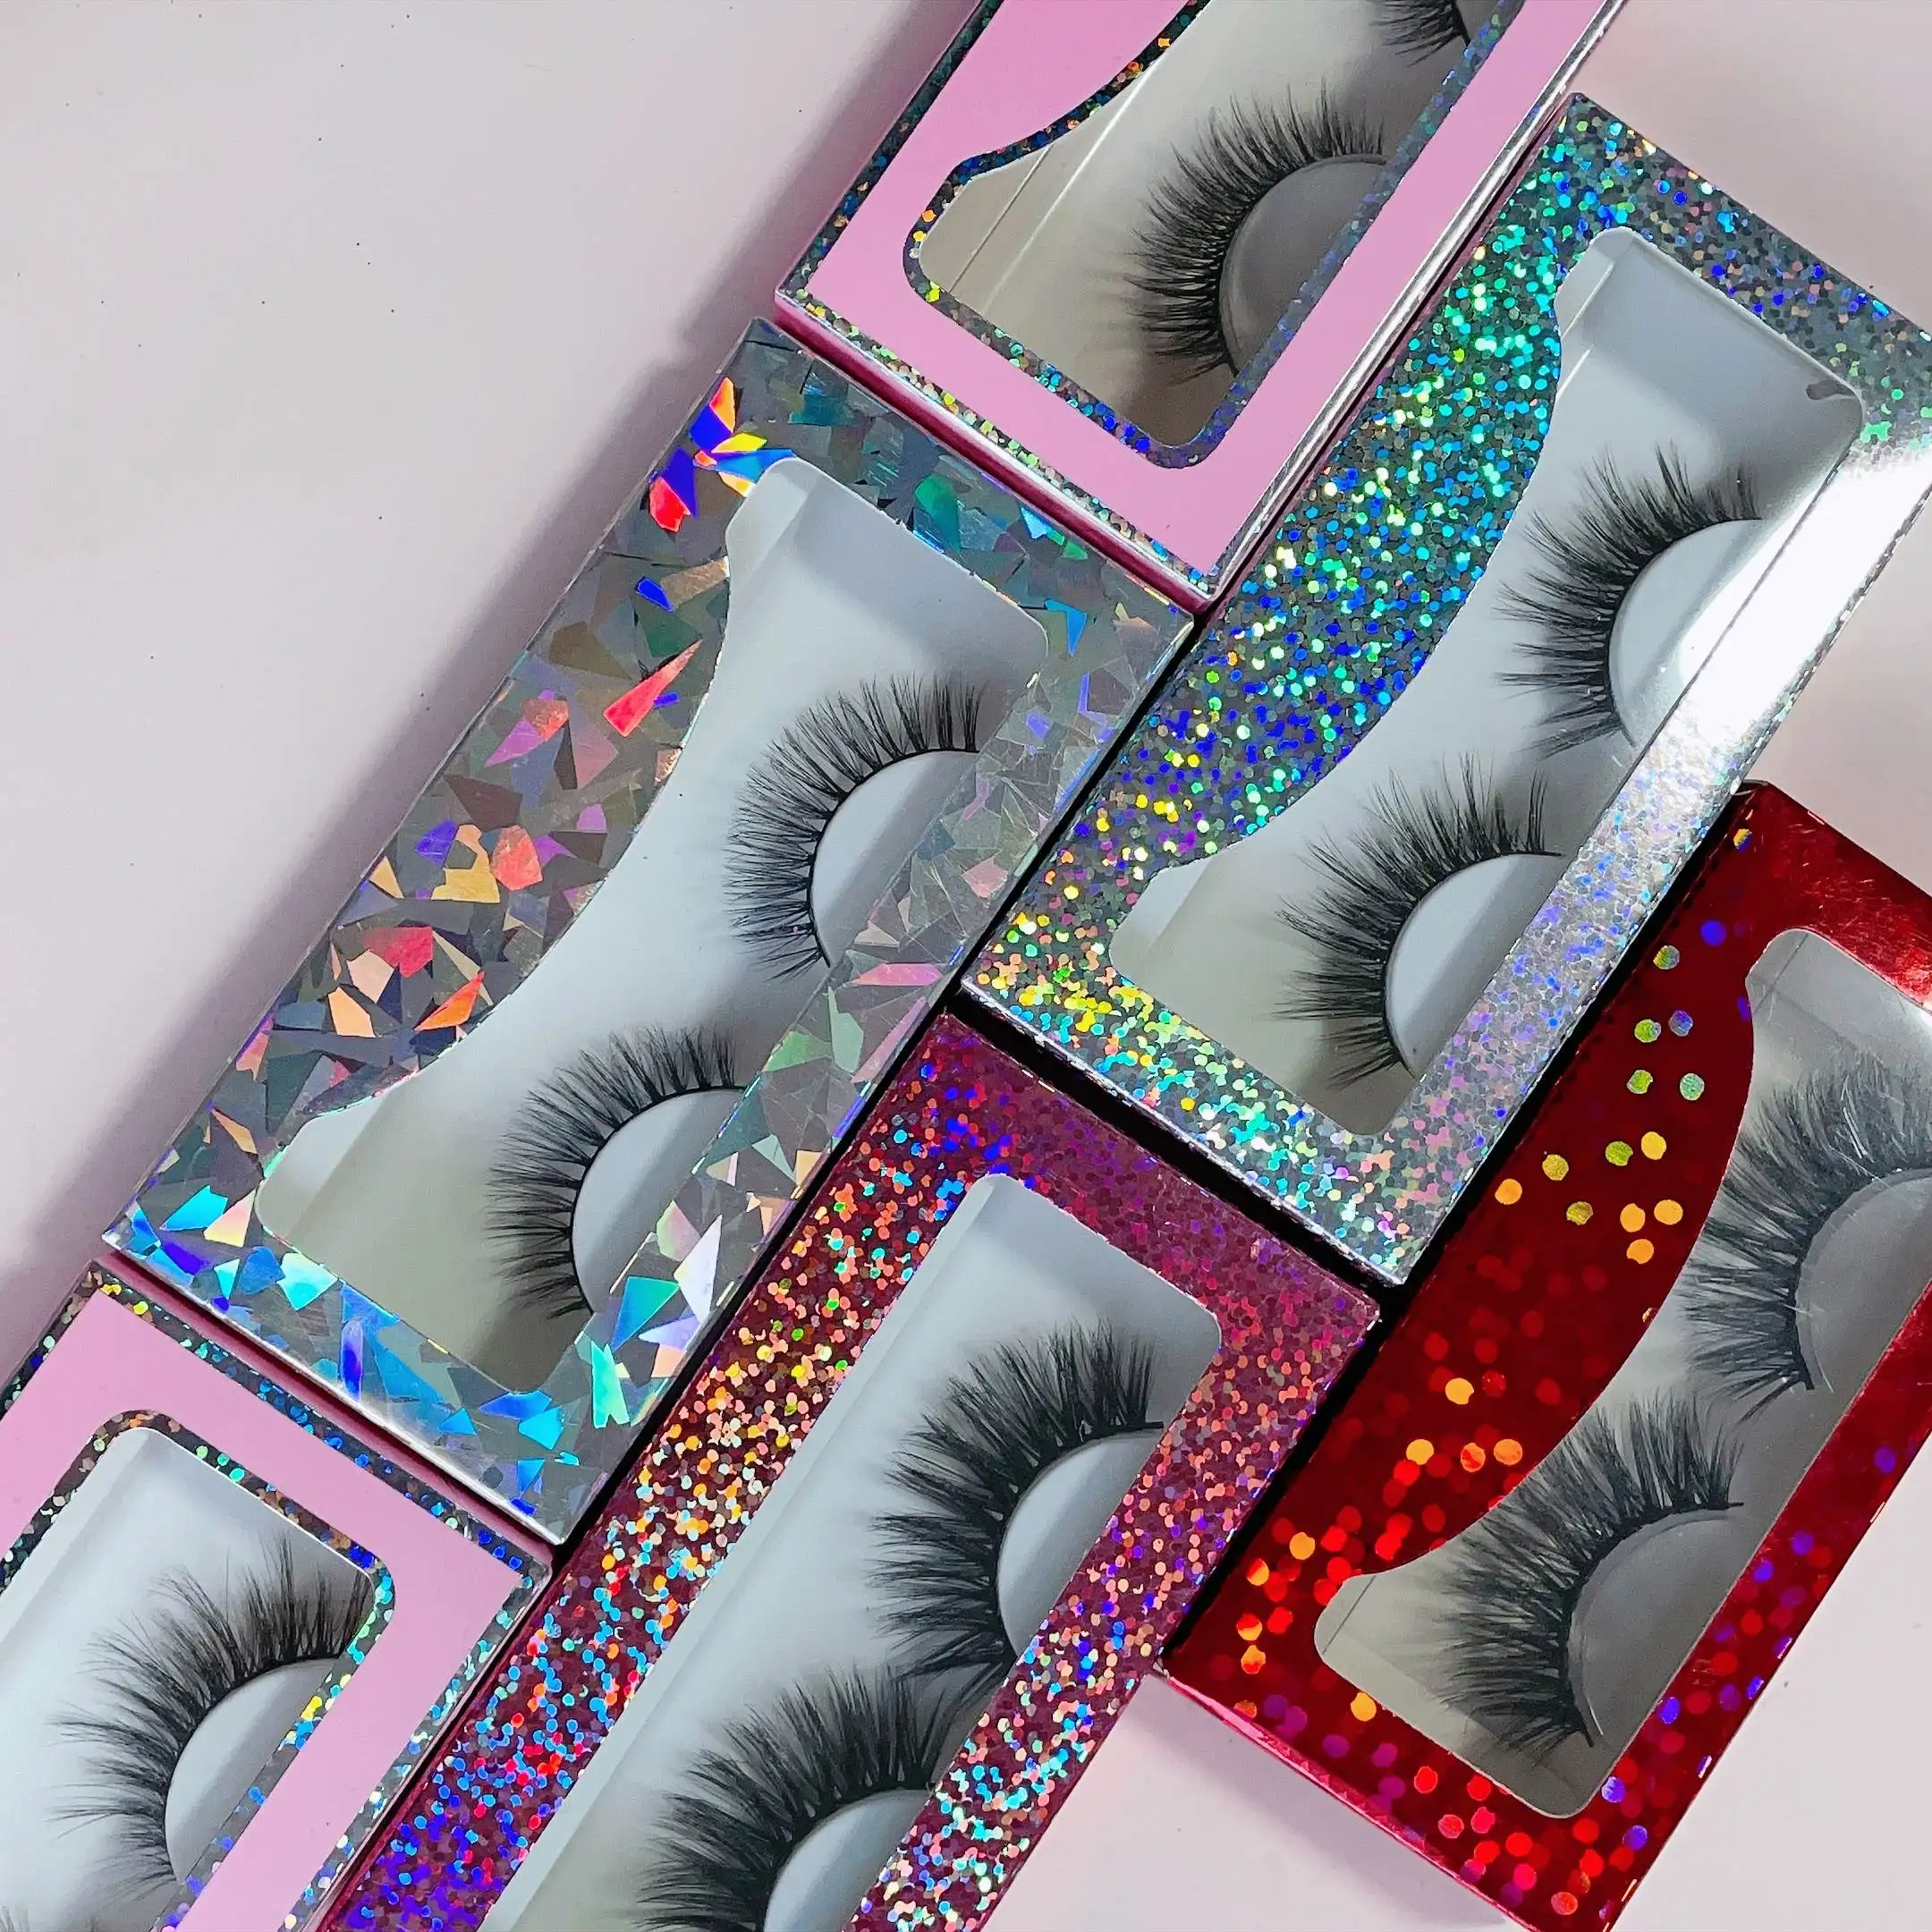 

Cheap price 3D 4D 5D 6D mink eyelashes 25MMM false eyelash packaging box with mink lashes package box, Black, color or multi-color customization